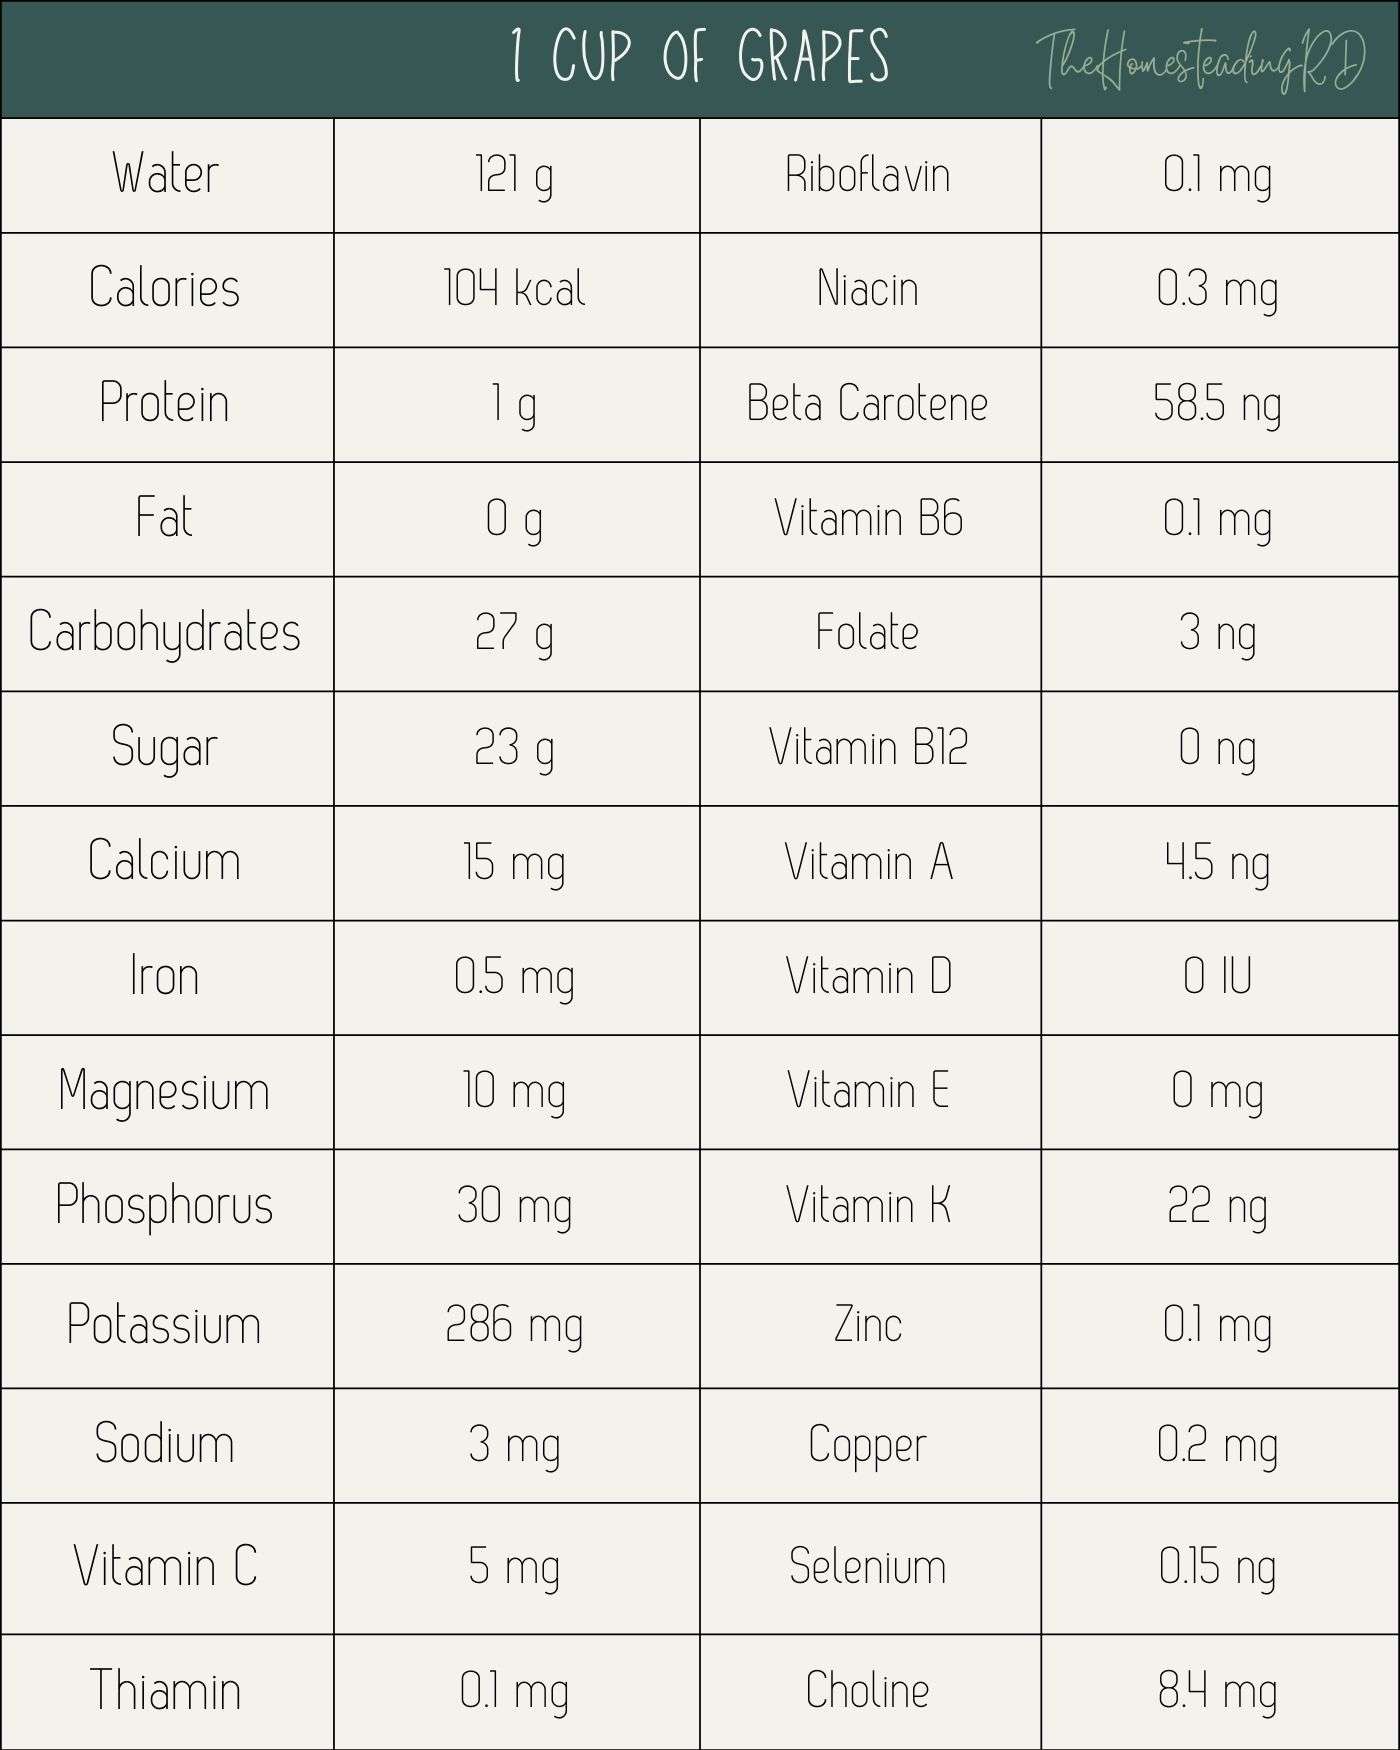 Table showing the nutritional content of 1 cup of grapes for chickens